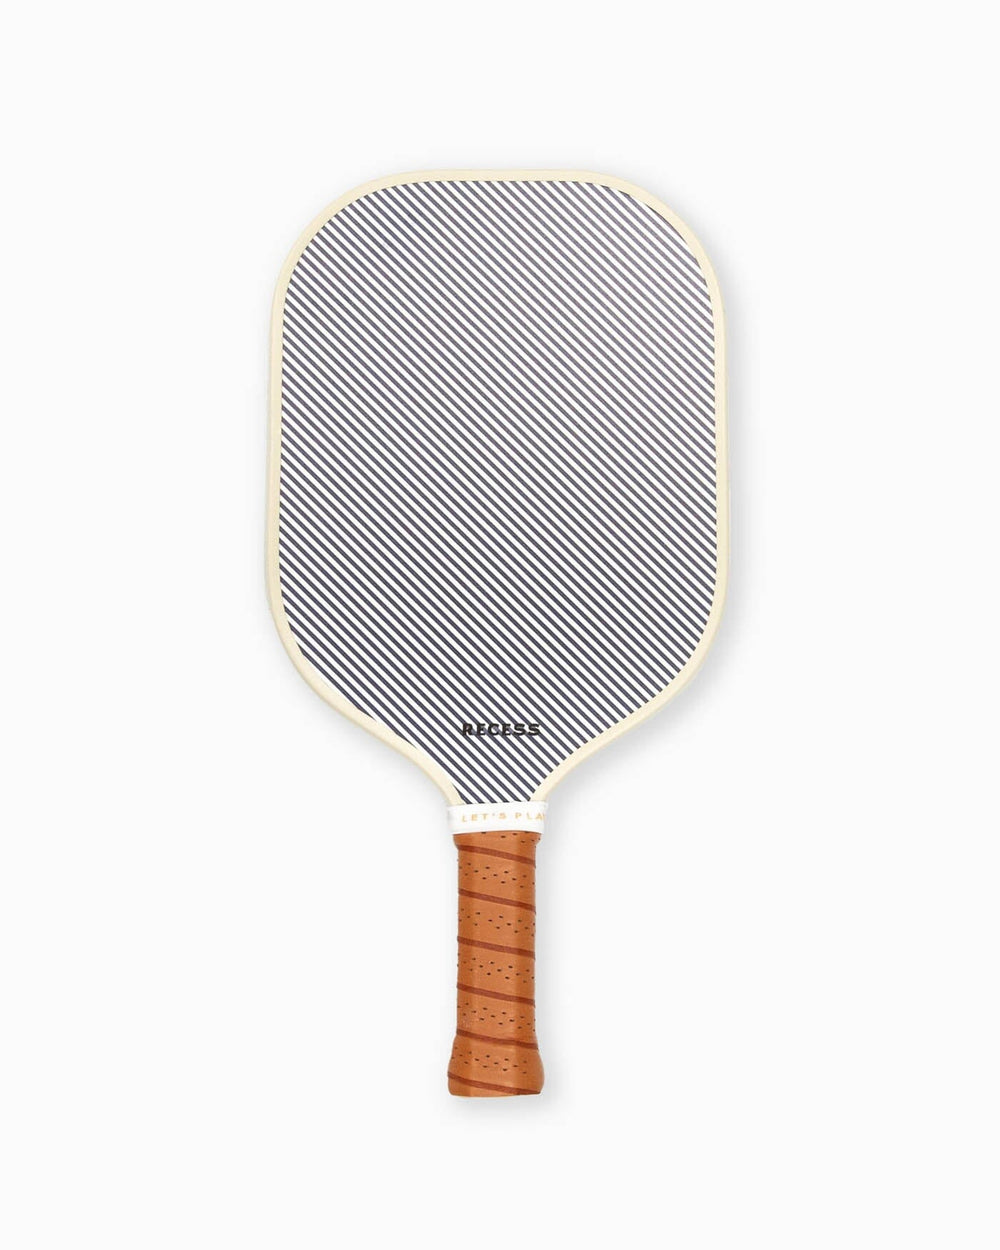 The back view of the Southern Tide Recess + Southern Tide Skipjack Stripe Pickleball Paddle by Southern Tide - Insignia Blue